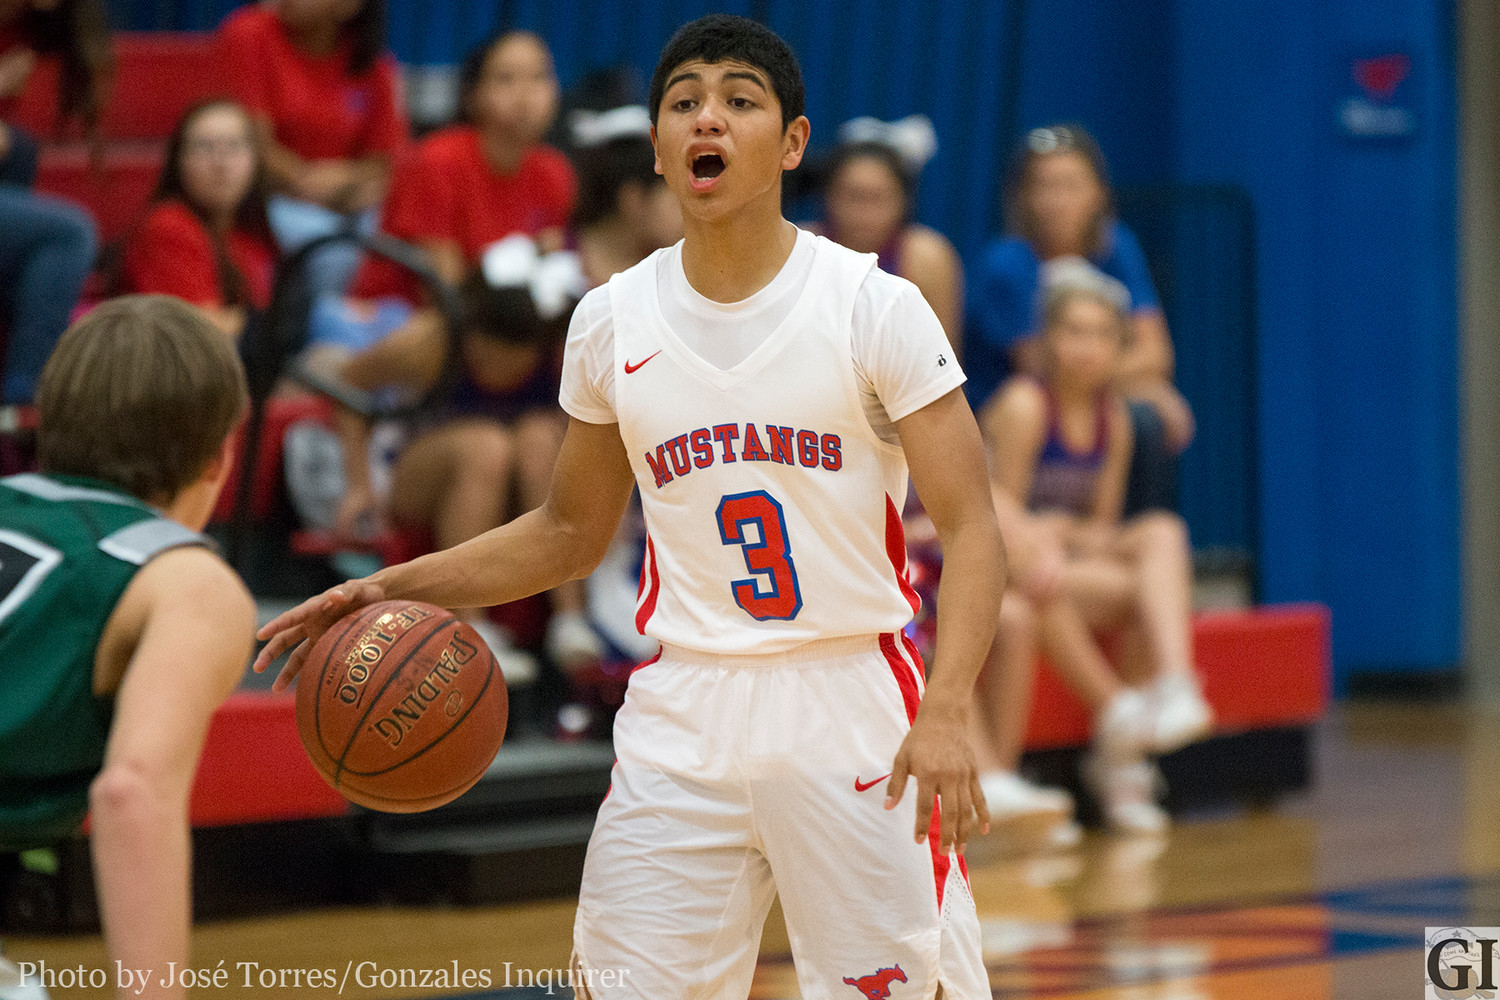 Jose Rodriguez (3) came away with four points in Nixon-Smiley's nine-point loss on Tuesday.